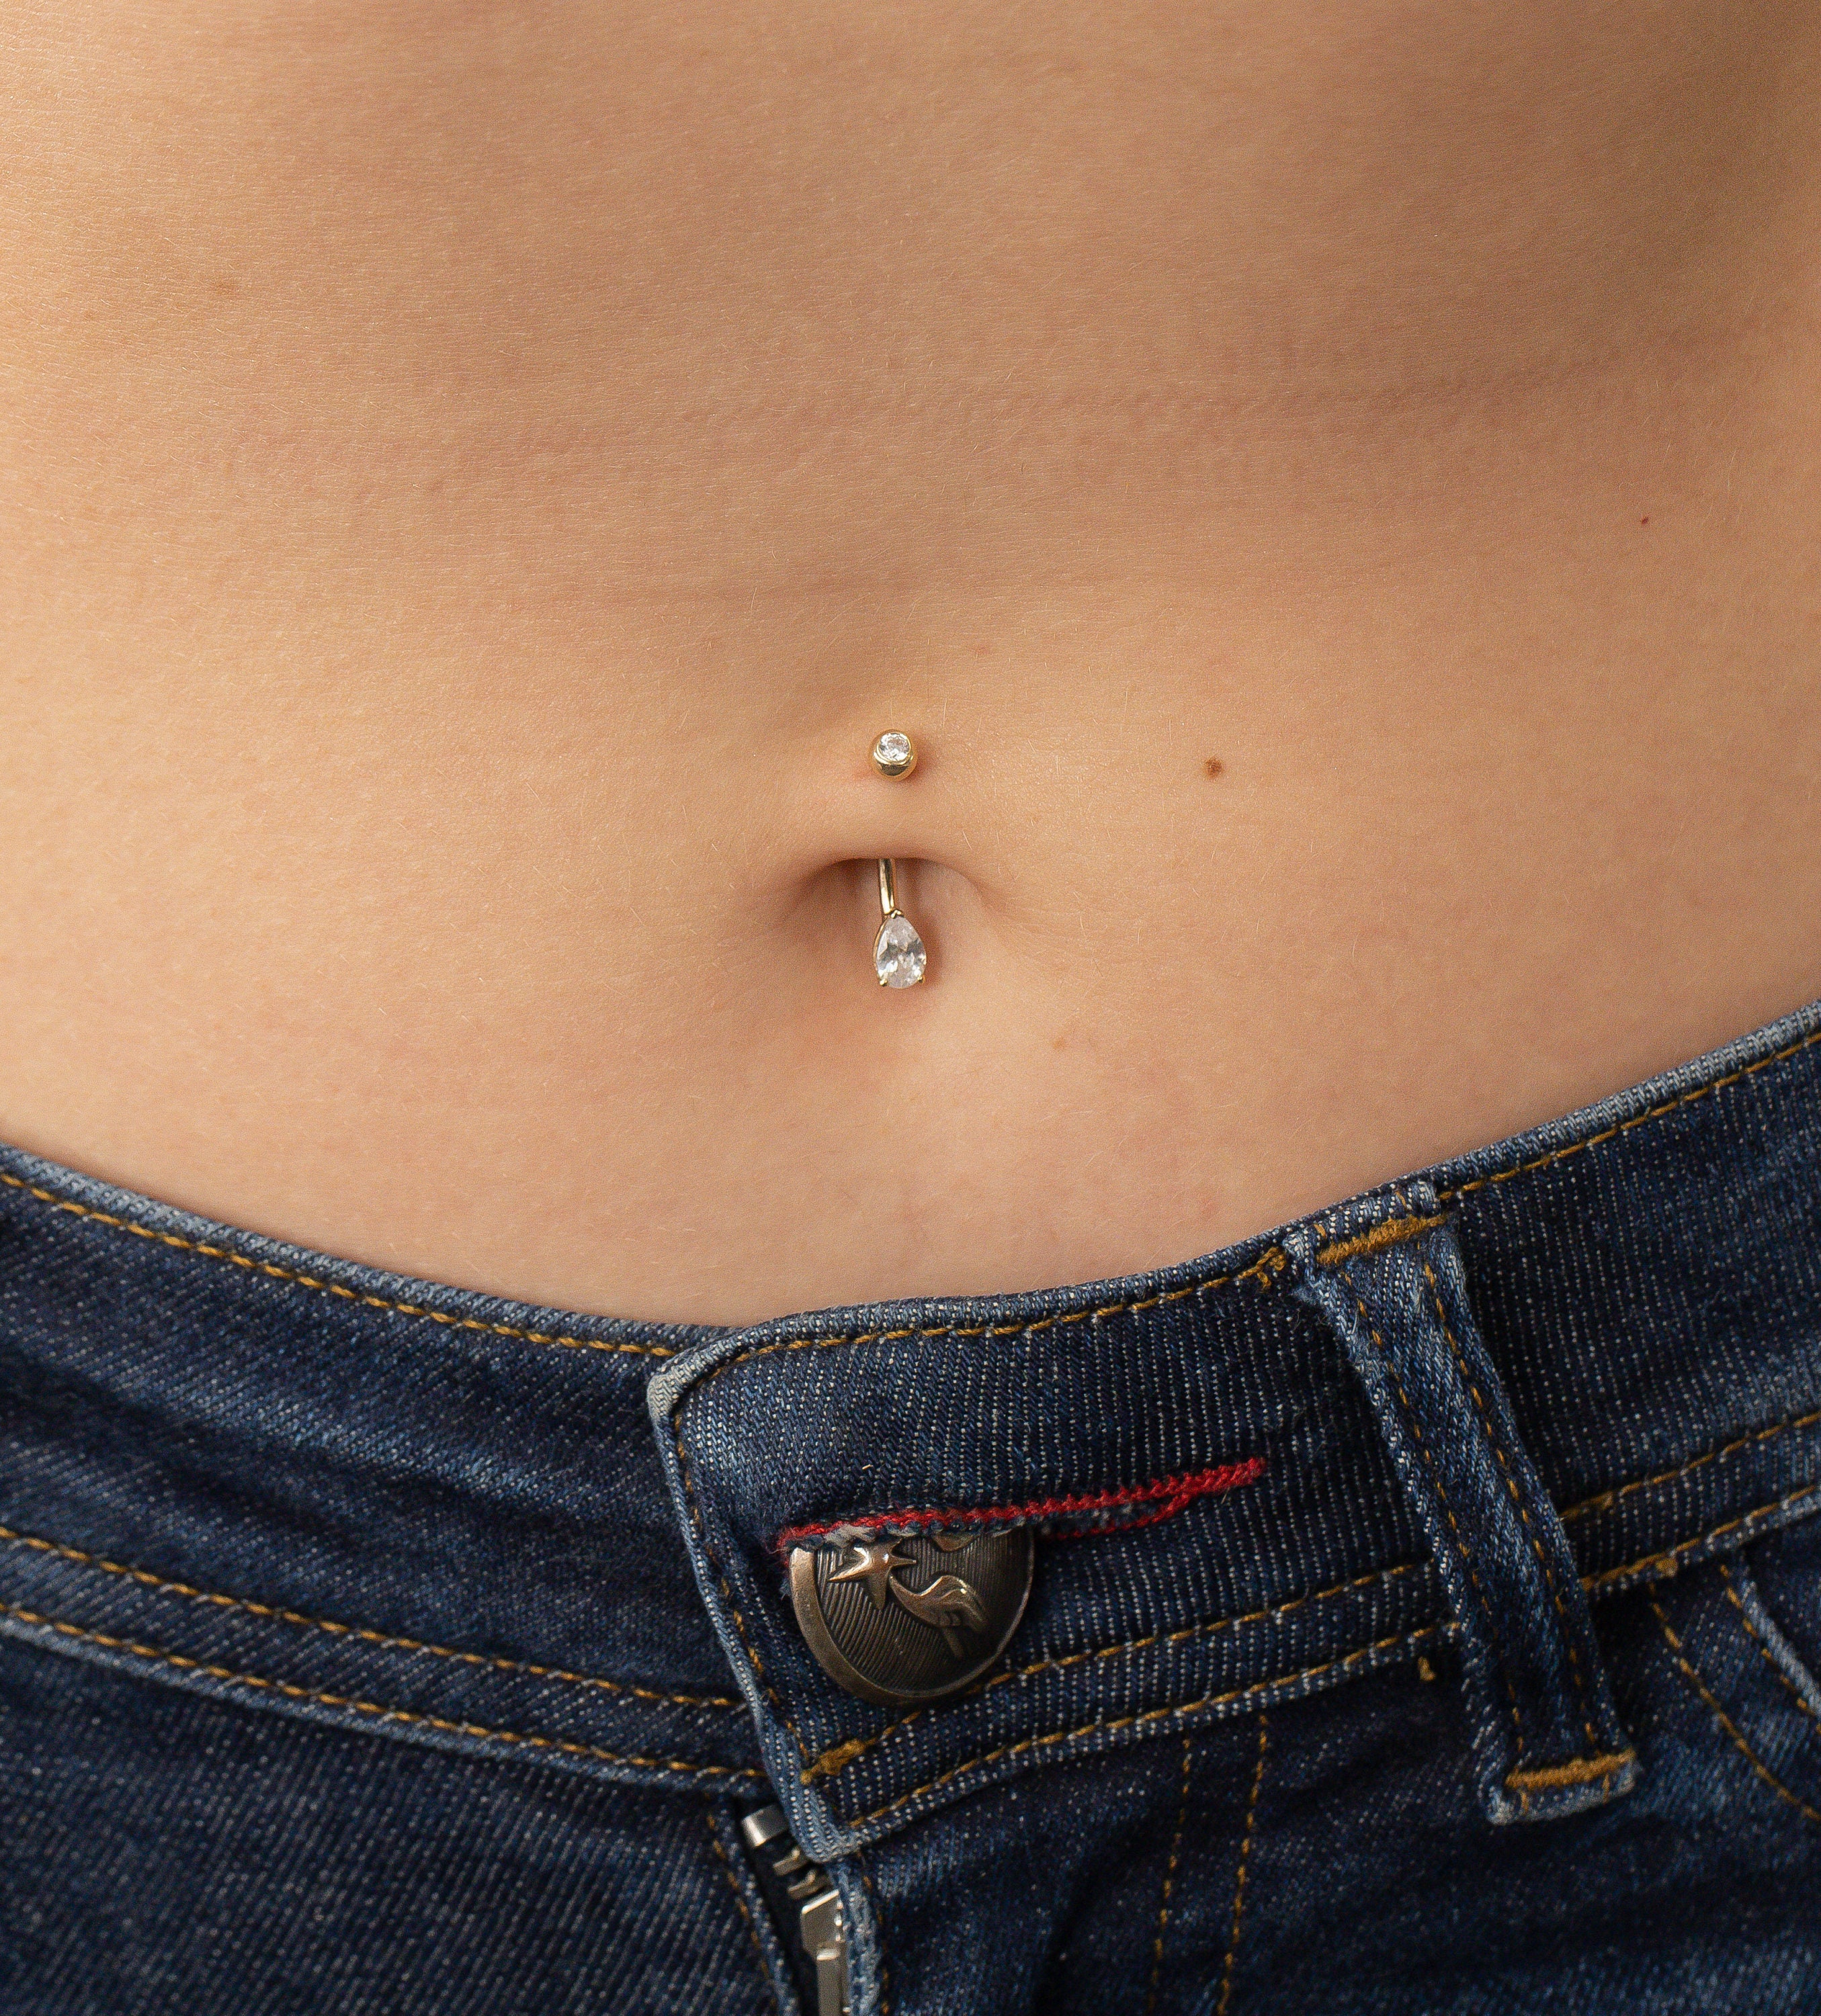 Camera Belly Button Piercing Ring, Photographer Jewelry